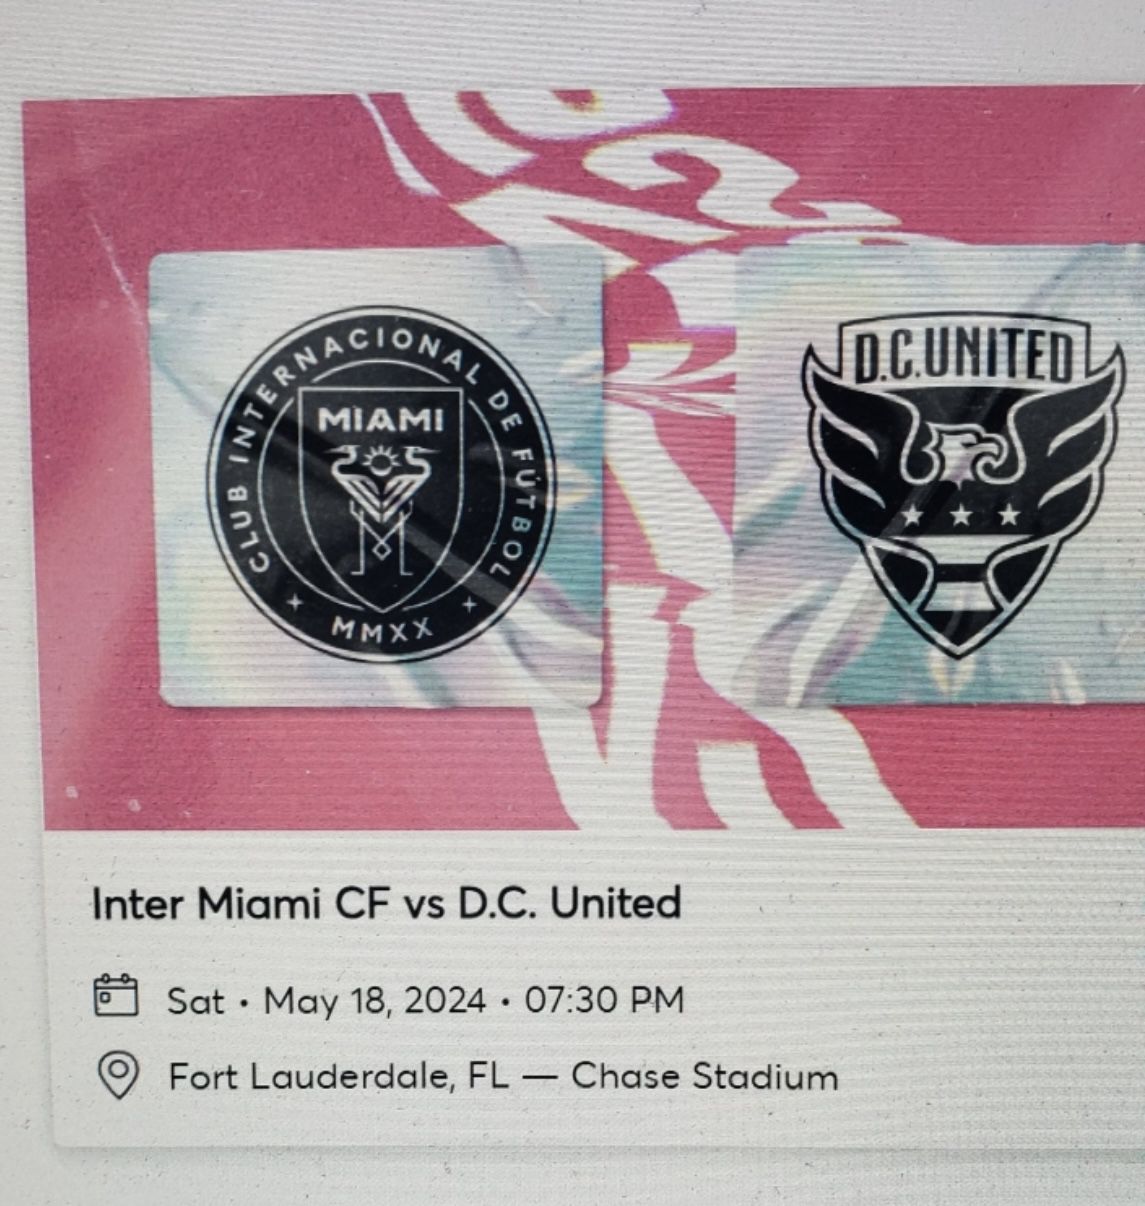 BEST PRICE!! 2 Inter Miami Tickets 🎟️ Saturday May 18th, 7:30PM Chase Stadium Fort Lauderdale 